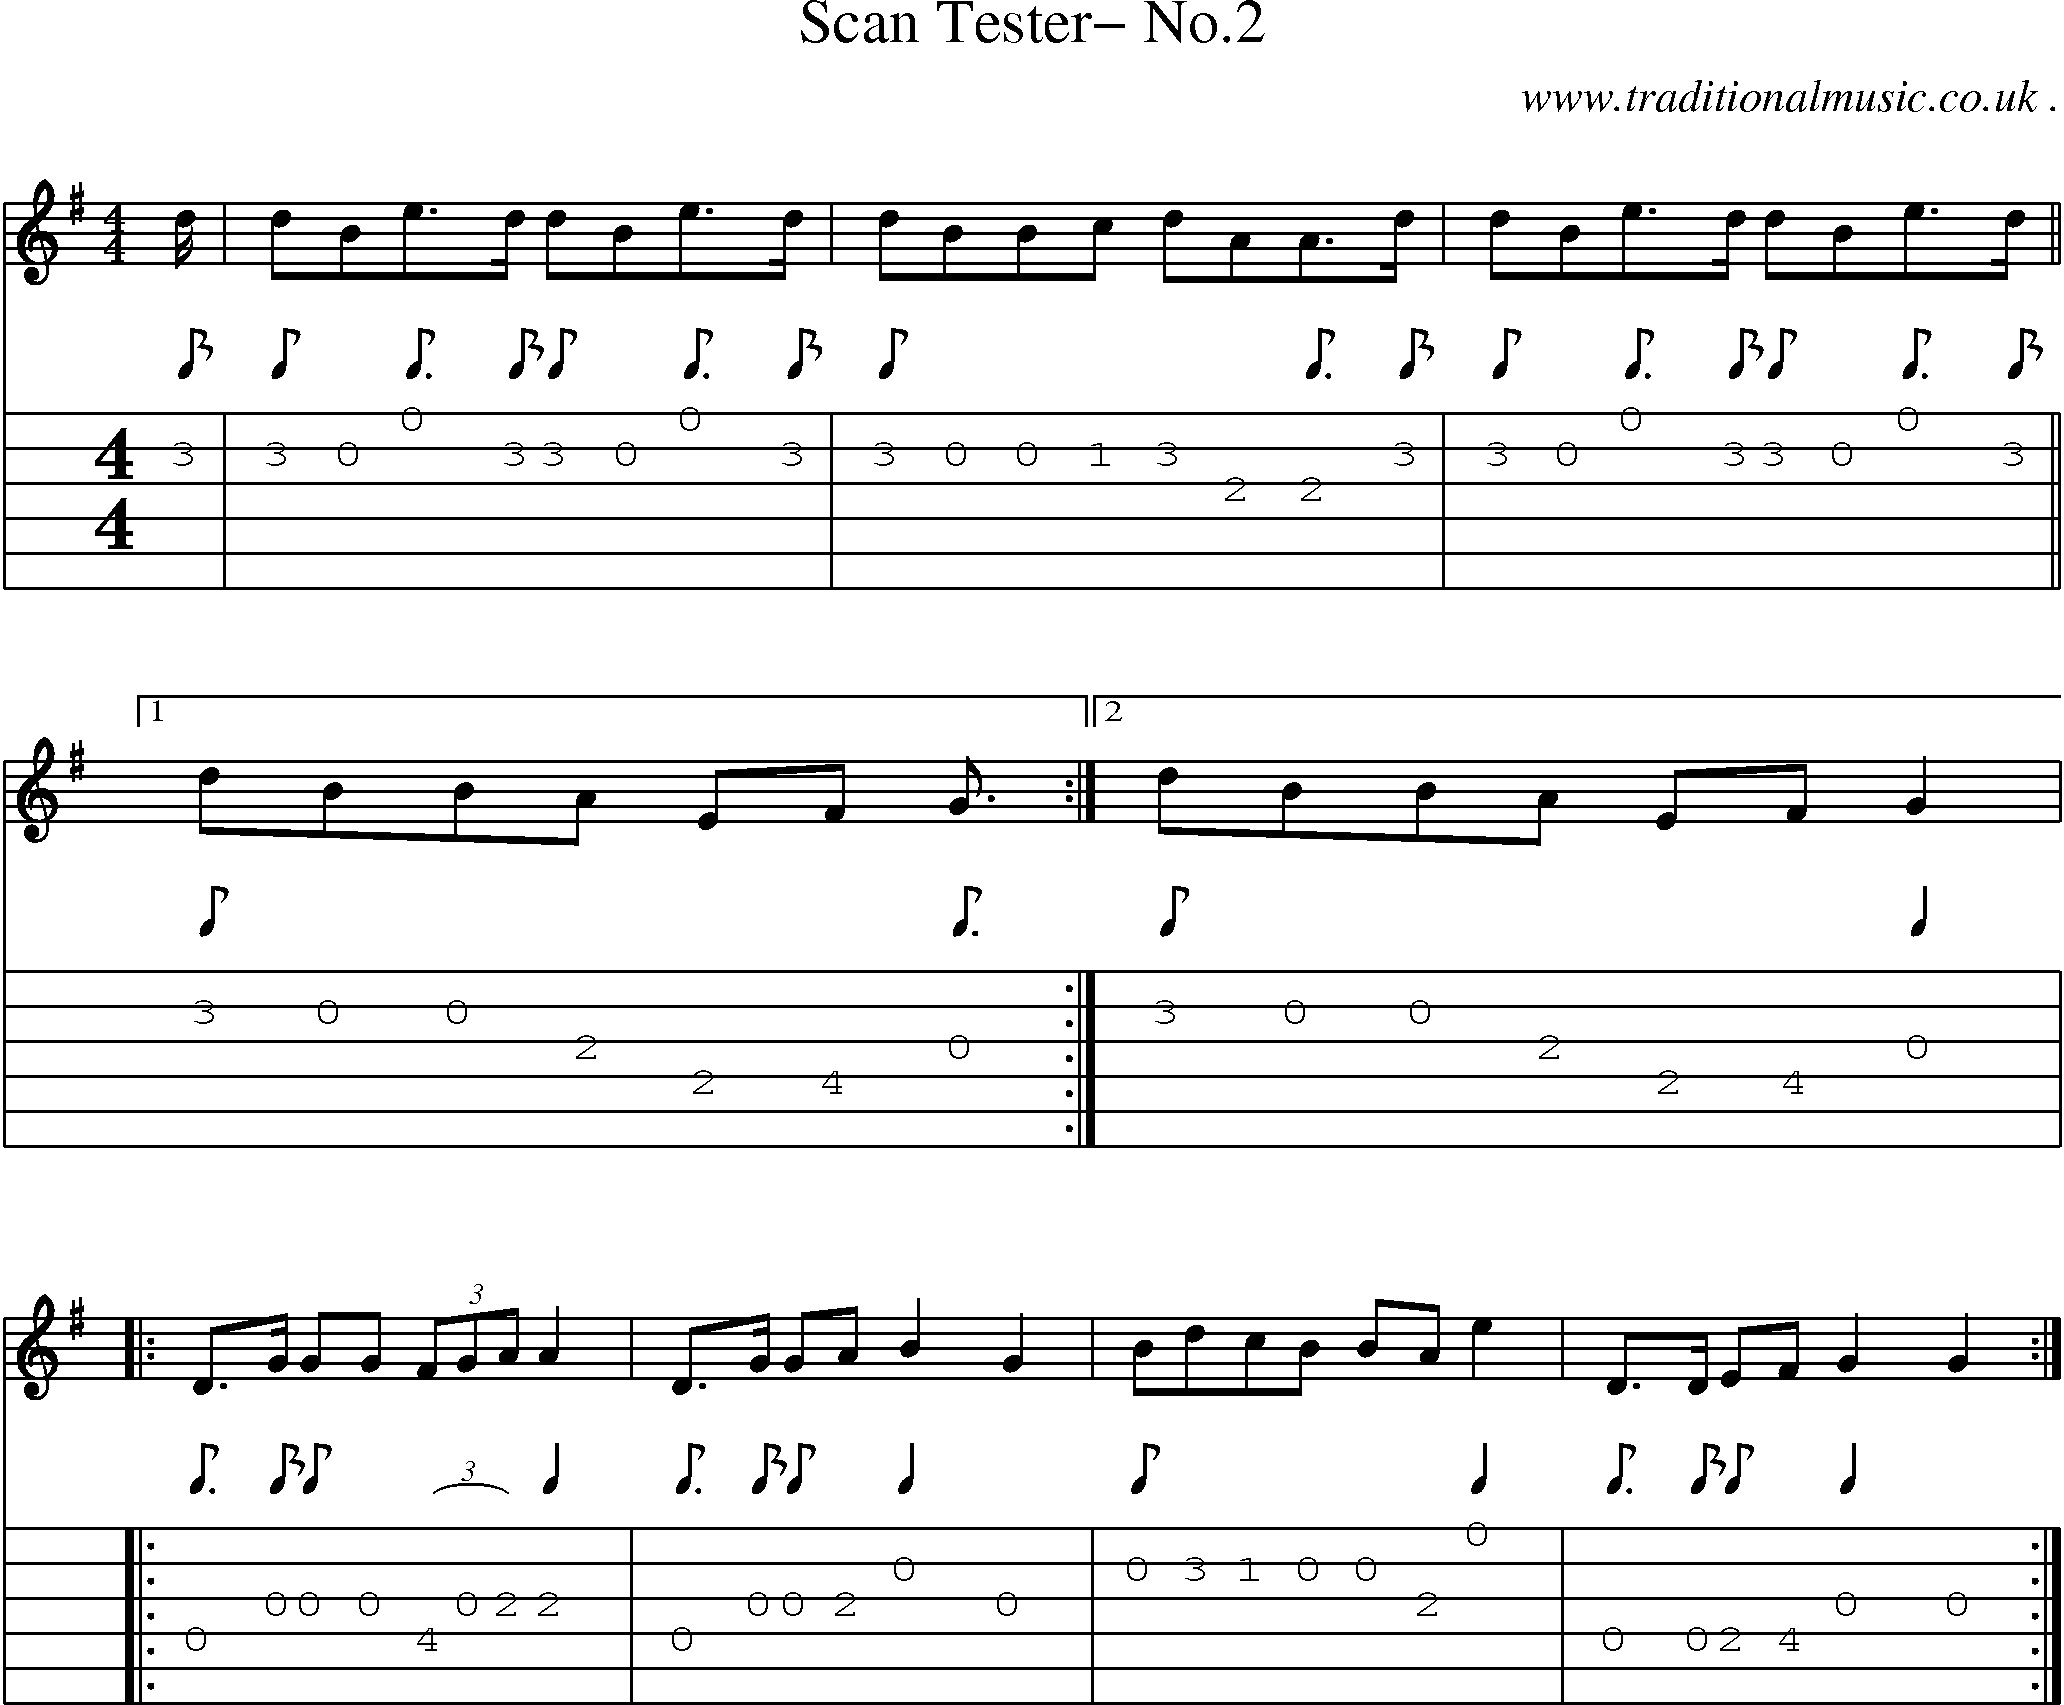 Sheet-Music and Guitar Tabs for Scan Tester No2